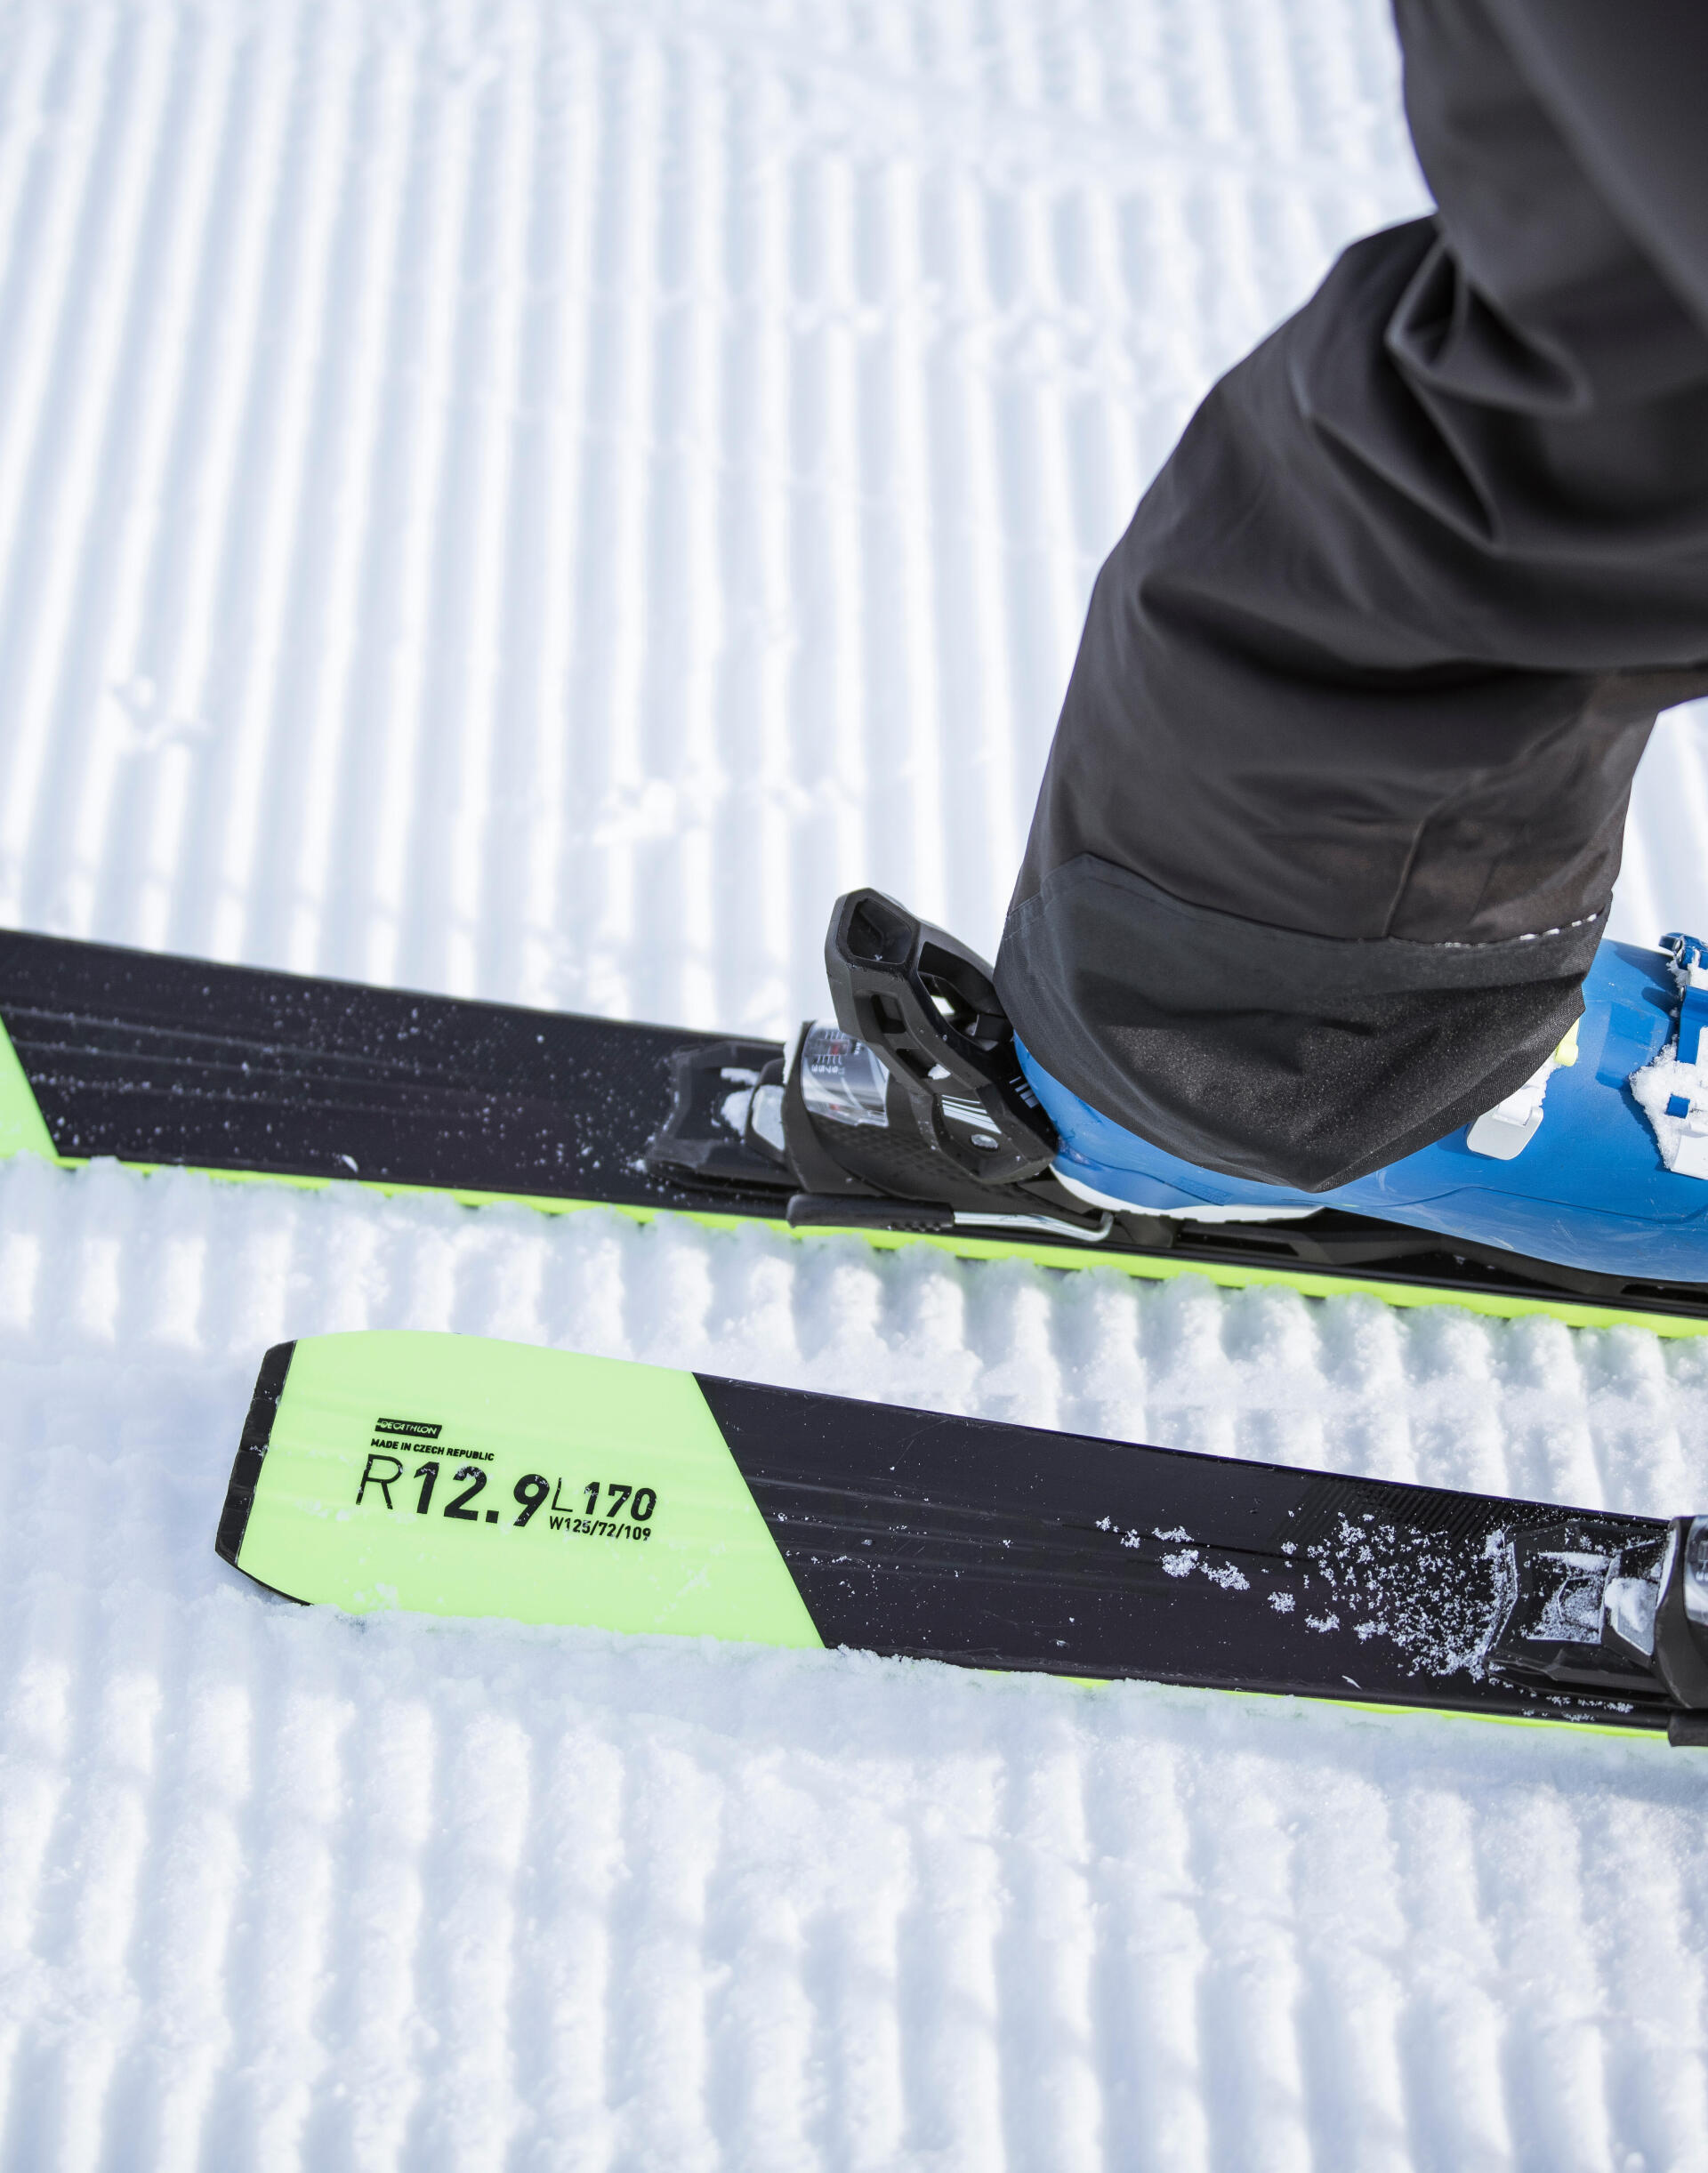 What is carving on skis, and how do you carve?